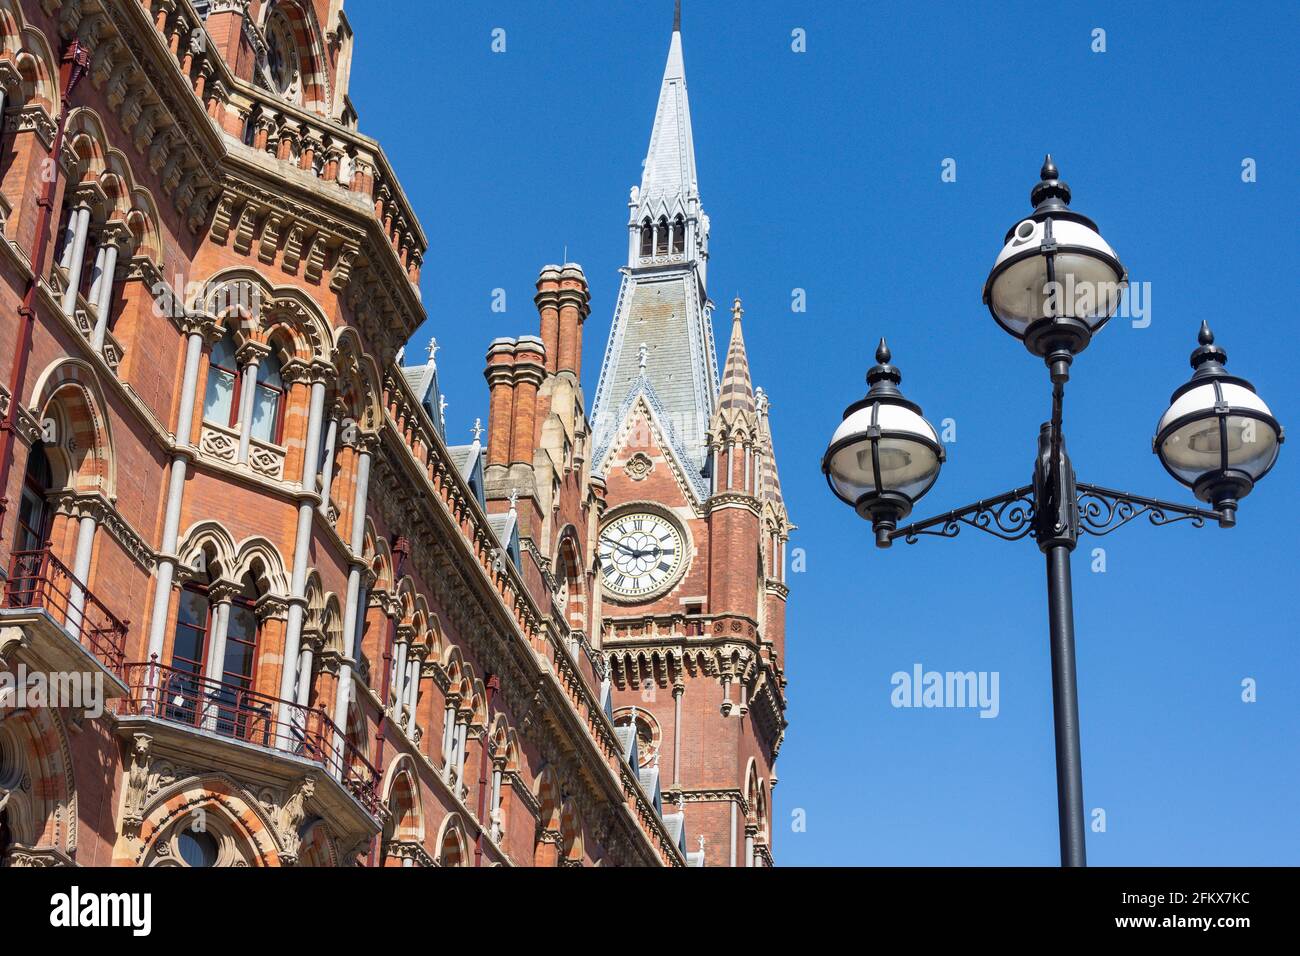 Clock Tower, St.Pancras International Railway Station, Euston Road, King's Cross, London Borough of Camden, Greater London, Angleterre, Royaume-Uni Banque D'Images